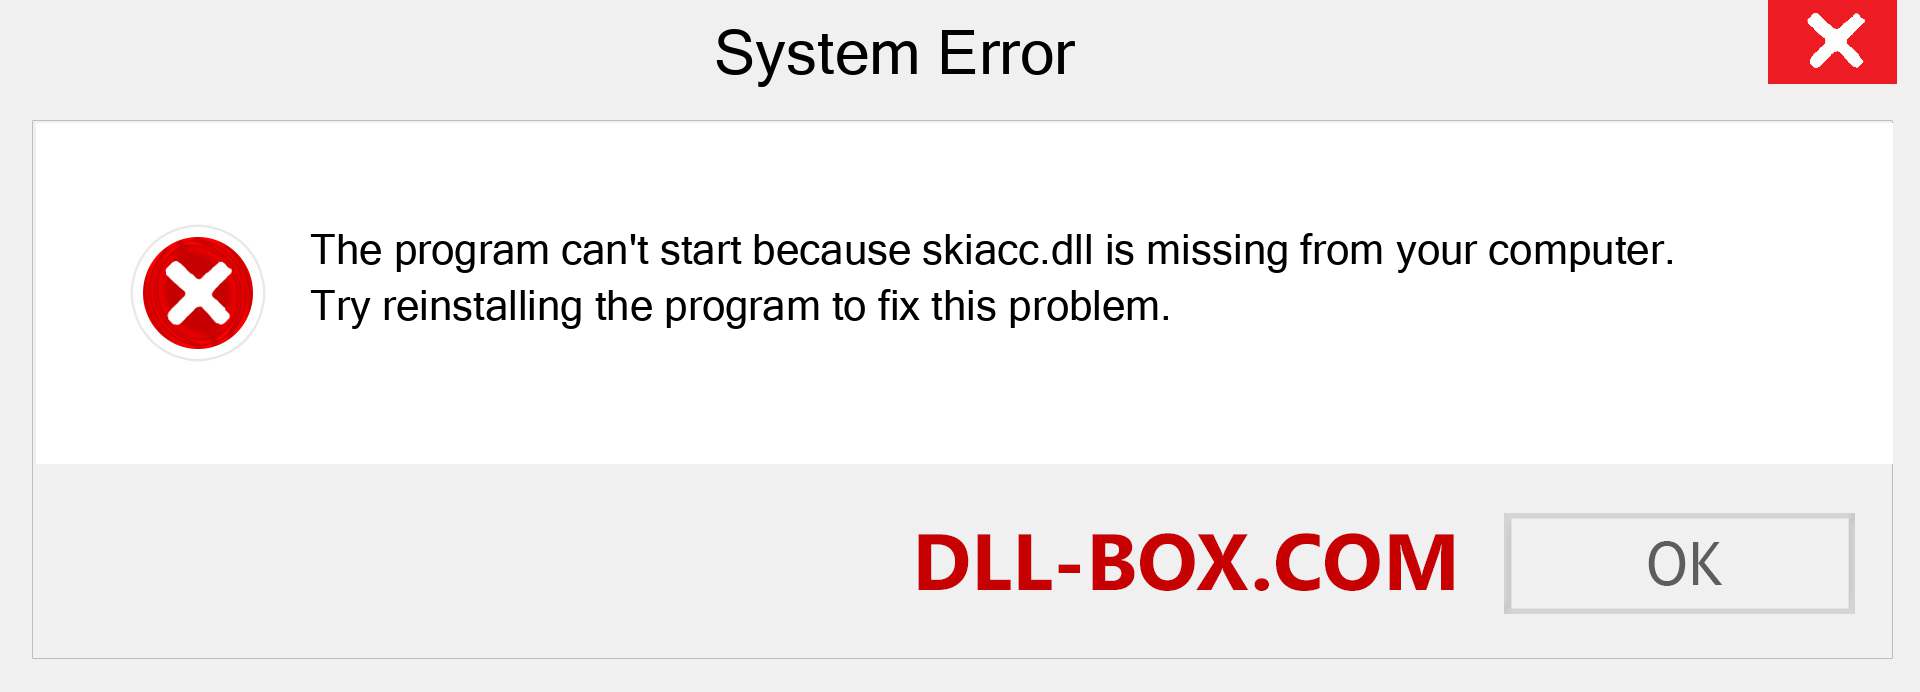  skiacc.dll file is missing?. Download for Windows 7, 8, 10 - Fix  skiacc dll Missing Error on Windows, photos, images